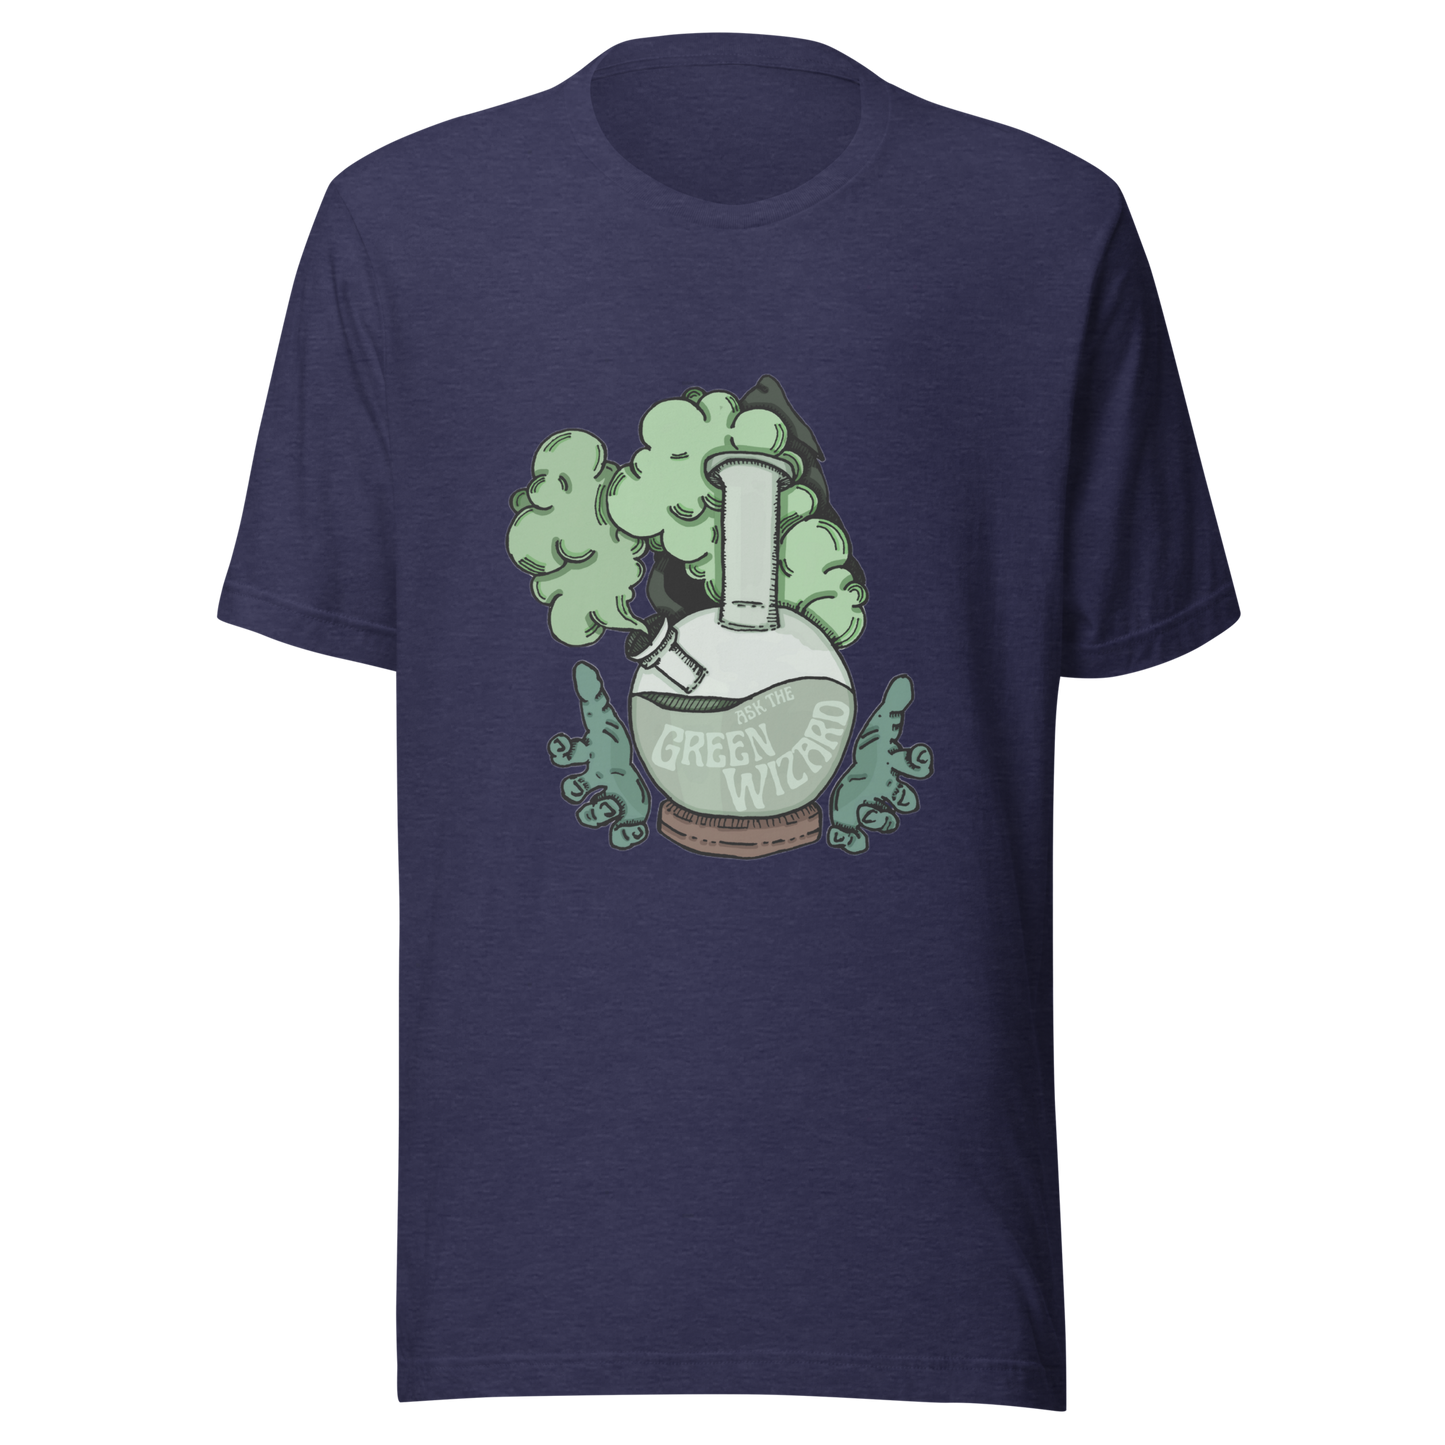 ask the green wizard t-shirt in navy - gaslit apparel